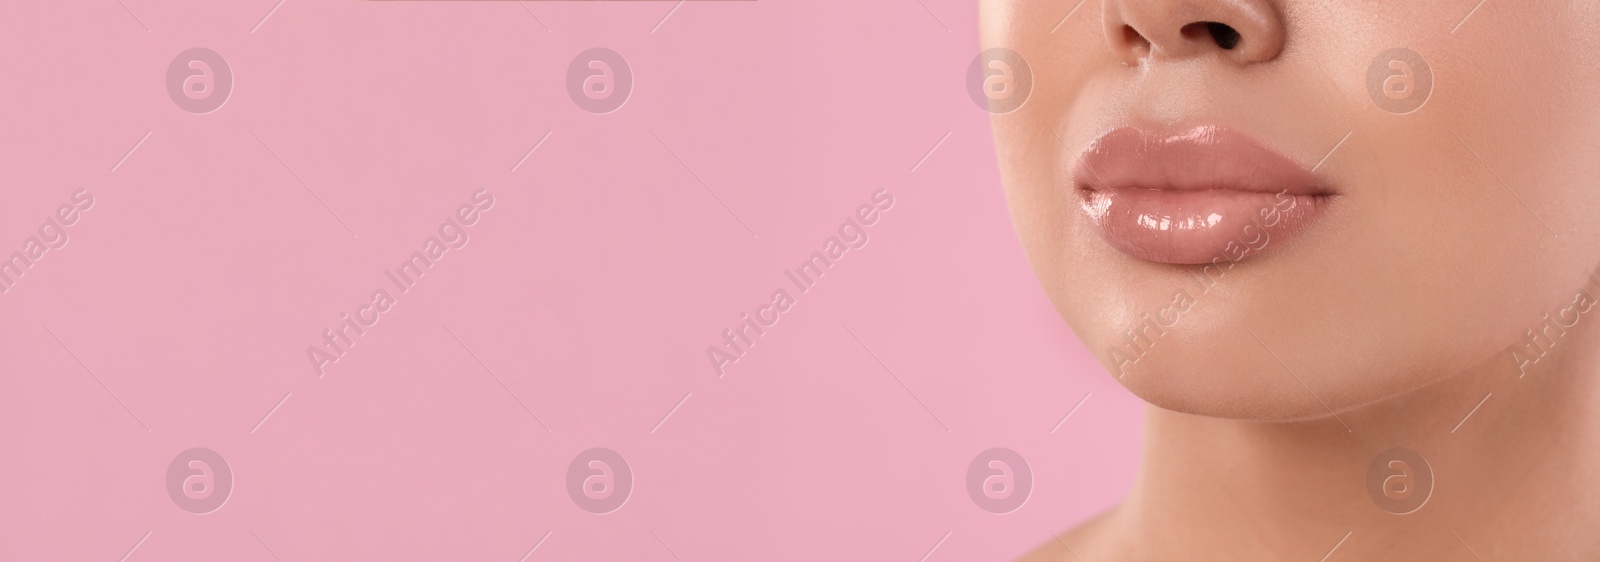 Image of Woman with beautiful lips on pink background, closeup view with space for text. Banner design